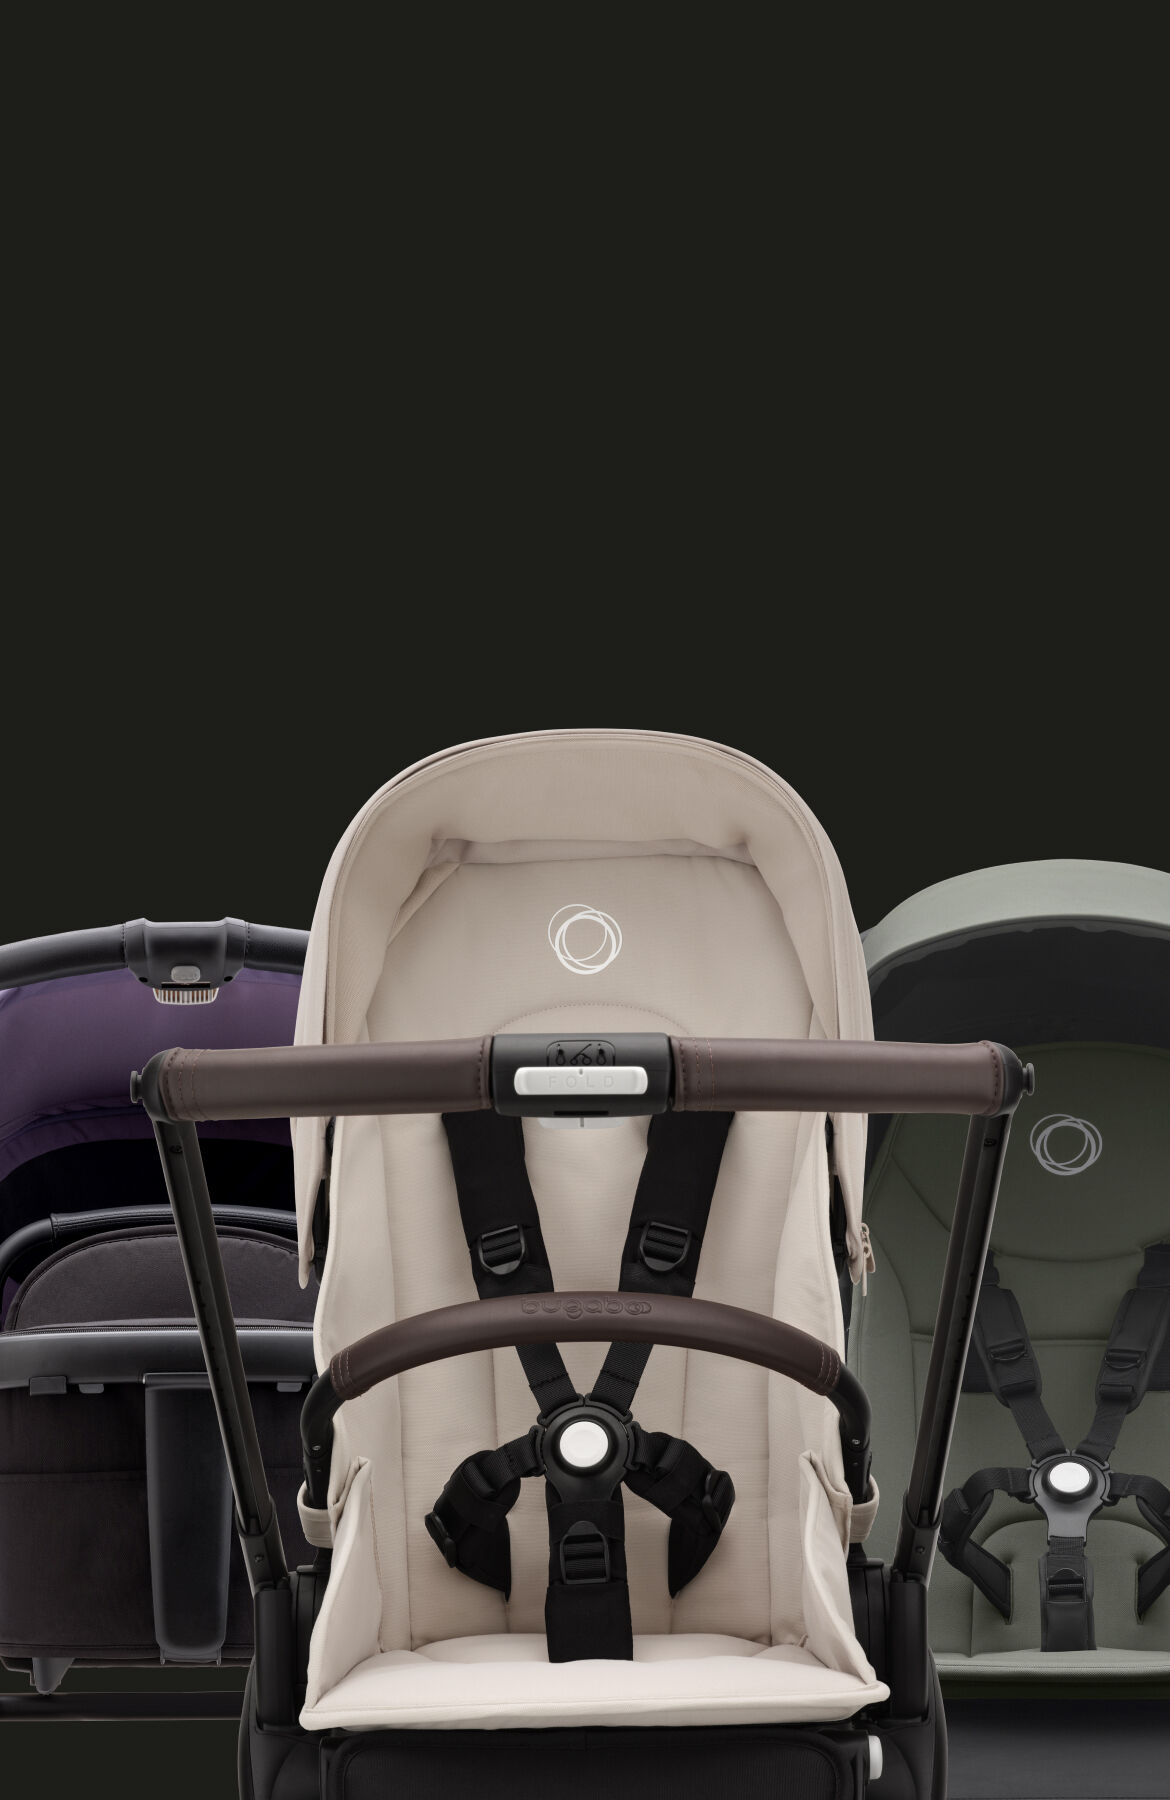 A lineup of a Bugaboo Dragonfly in Misty White fabrics, a Bugaboo Fox 5 in Astro Purple sun canopy, and a Bugaboo Butterfly in Forest Green fabrics